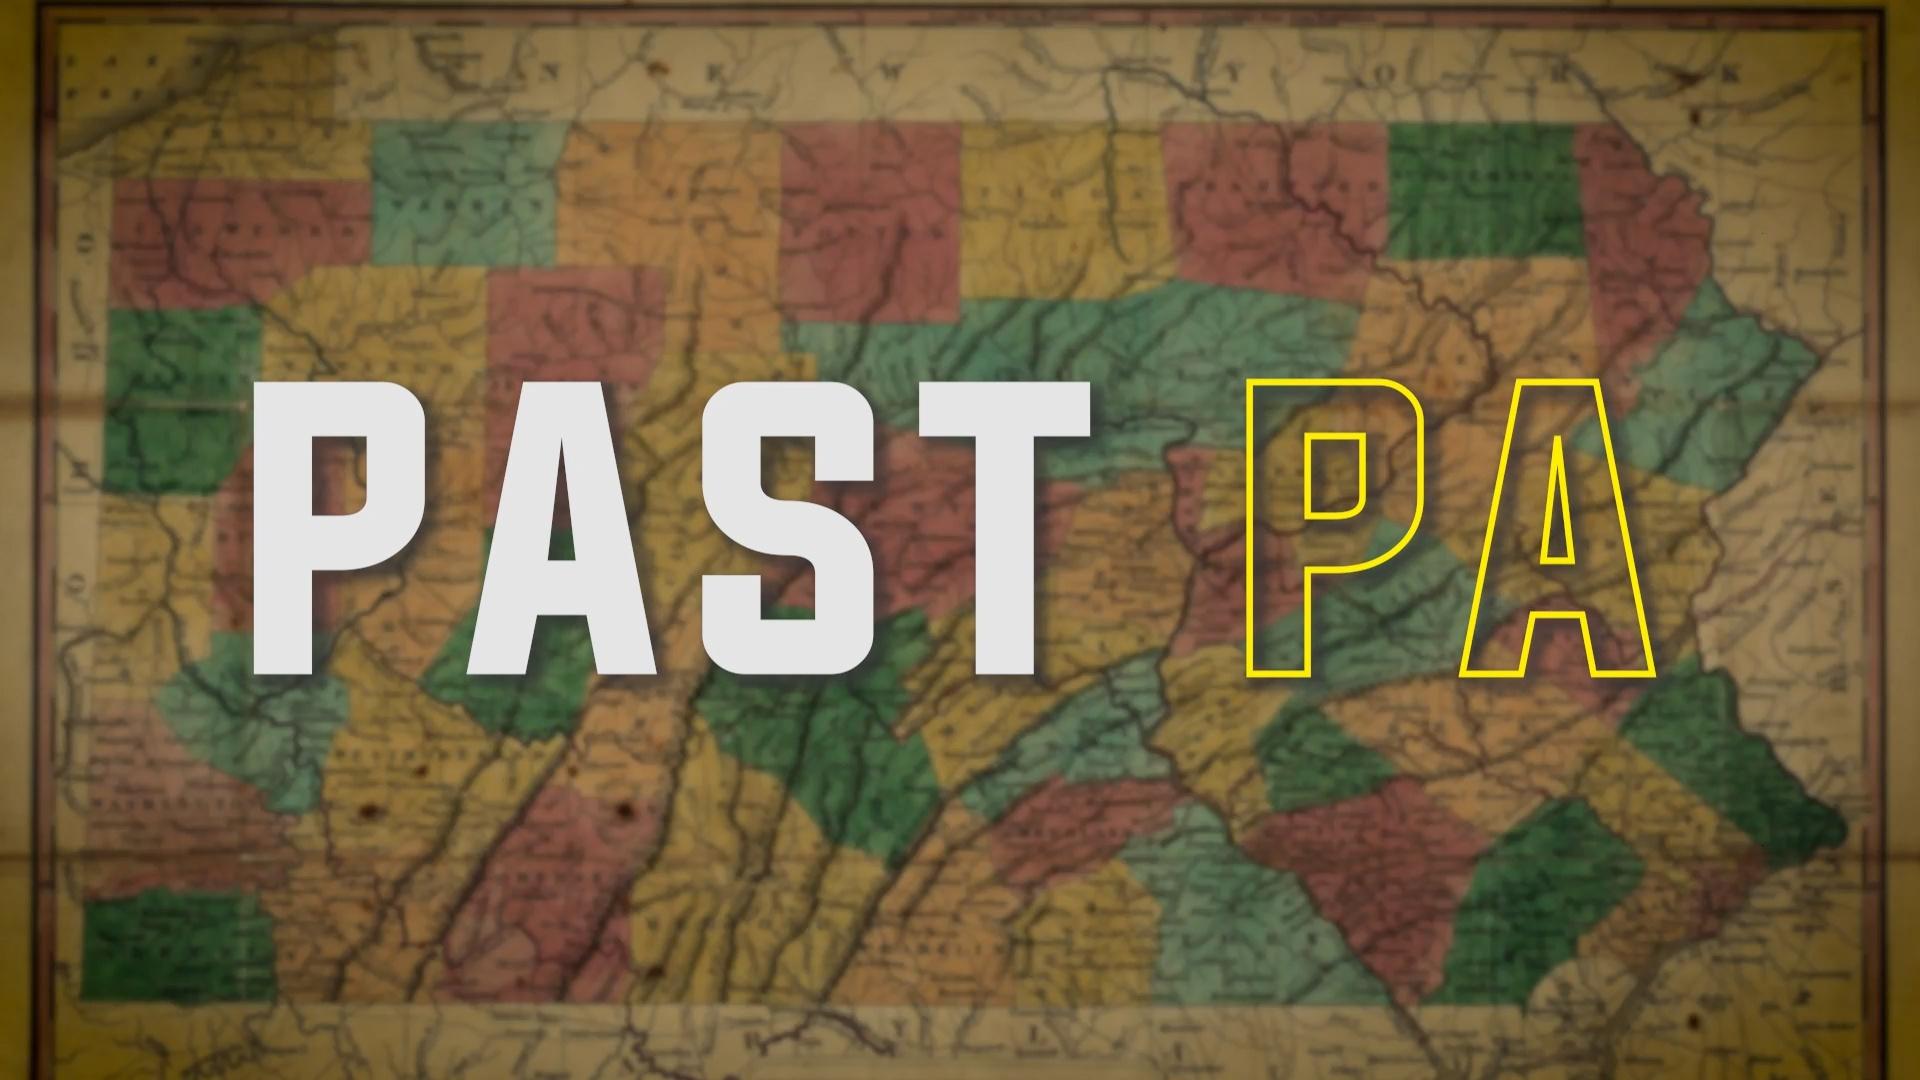 A multicolored map of Pennsylvania with the words "Past PA" in the foreground.